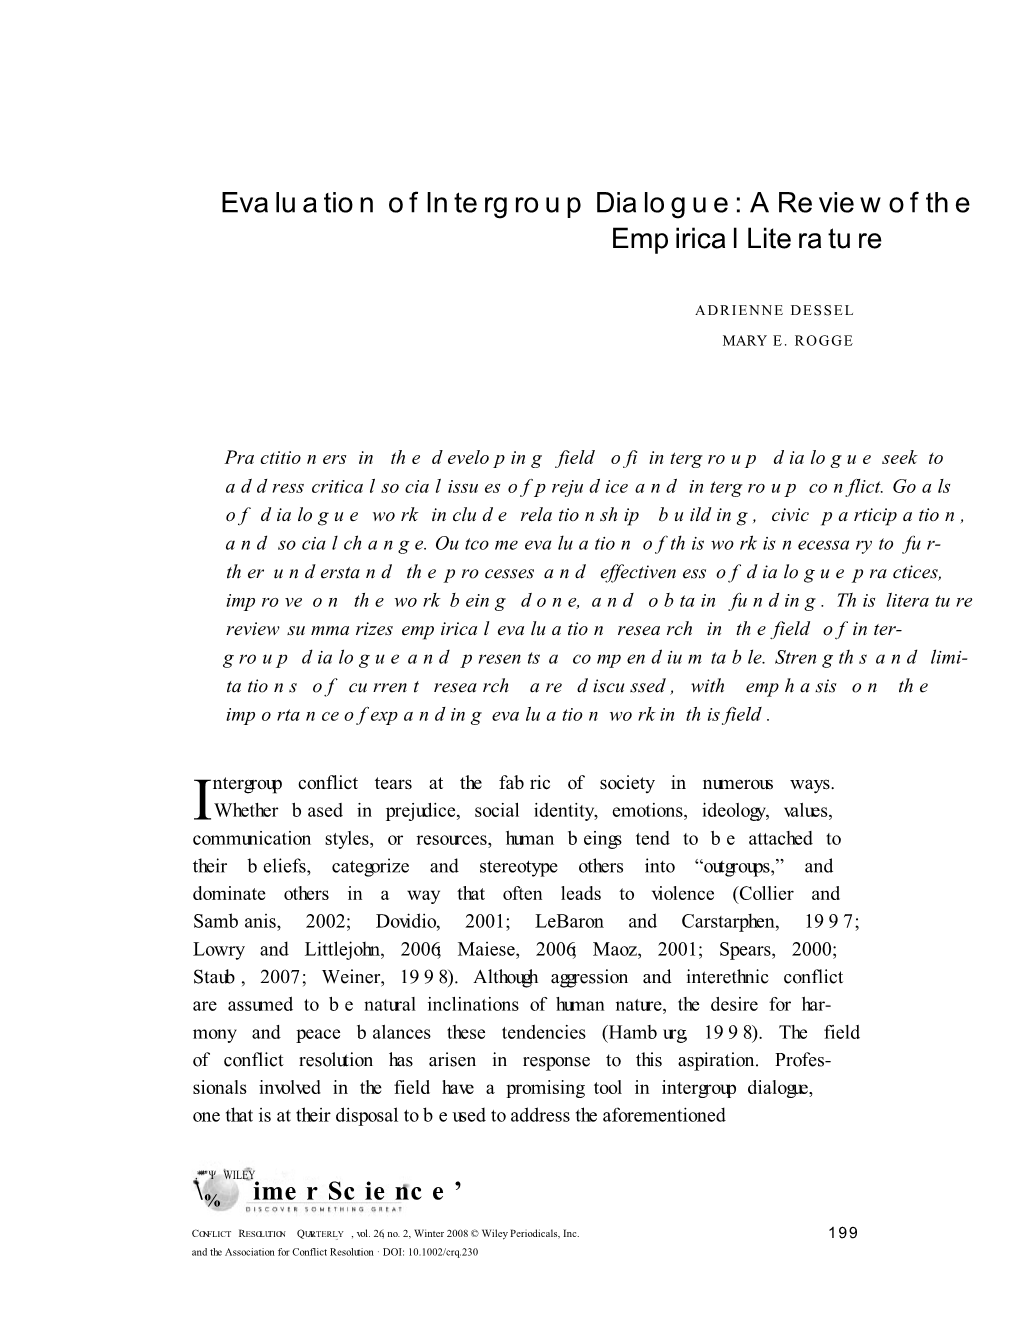 Evaluation of Intergroup Dialogue: a Review of the Empirical Literature